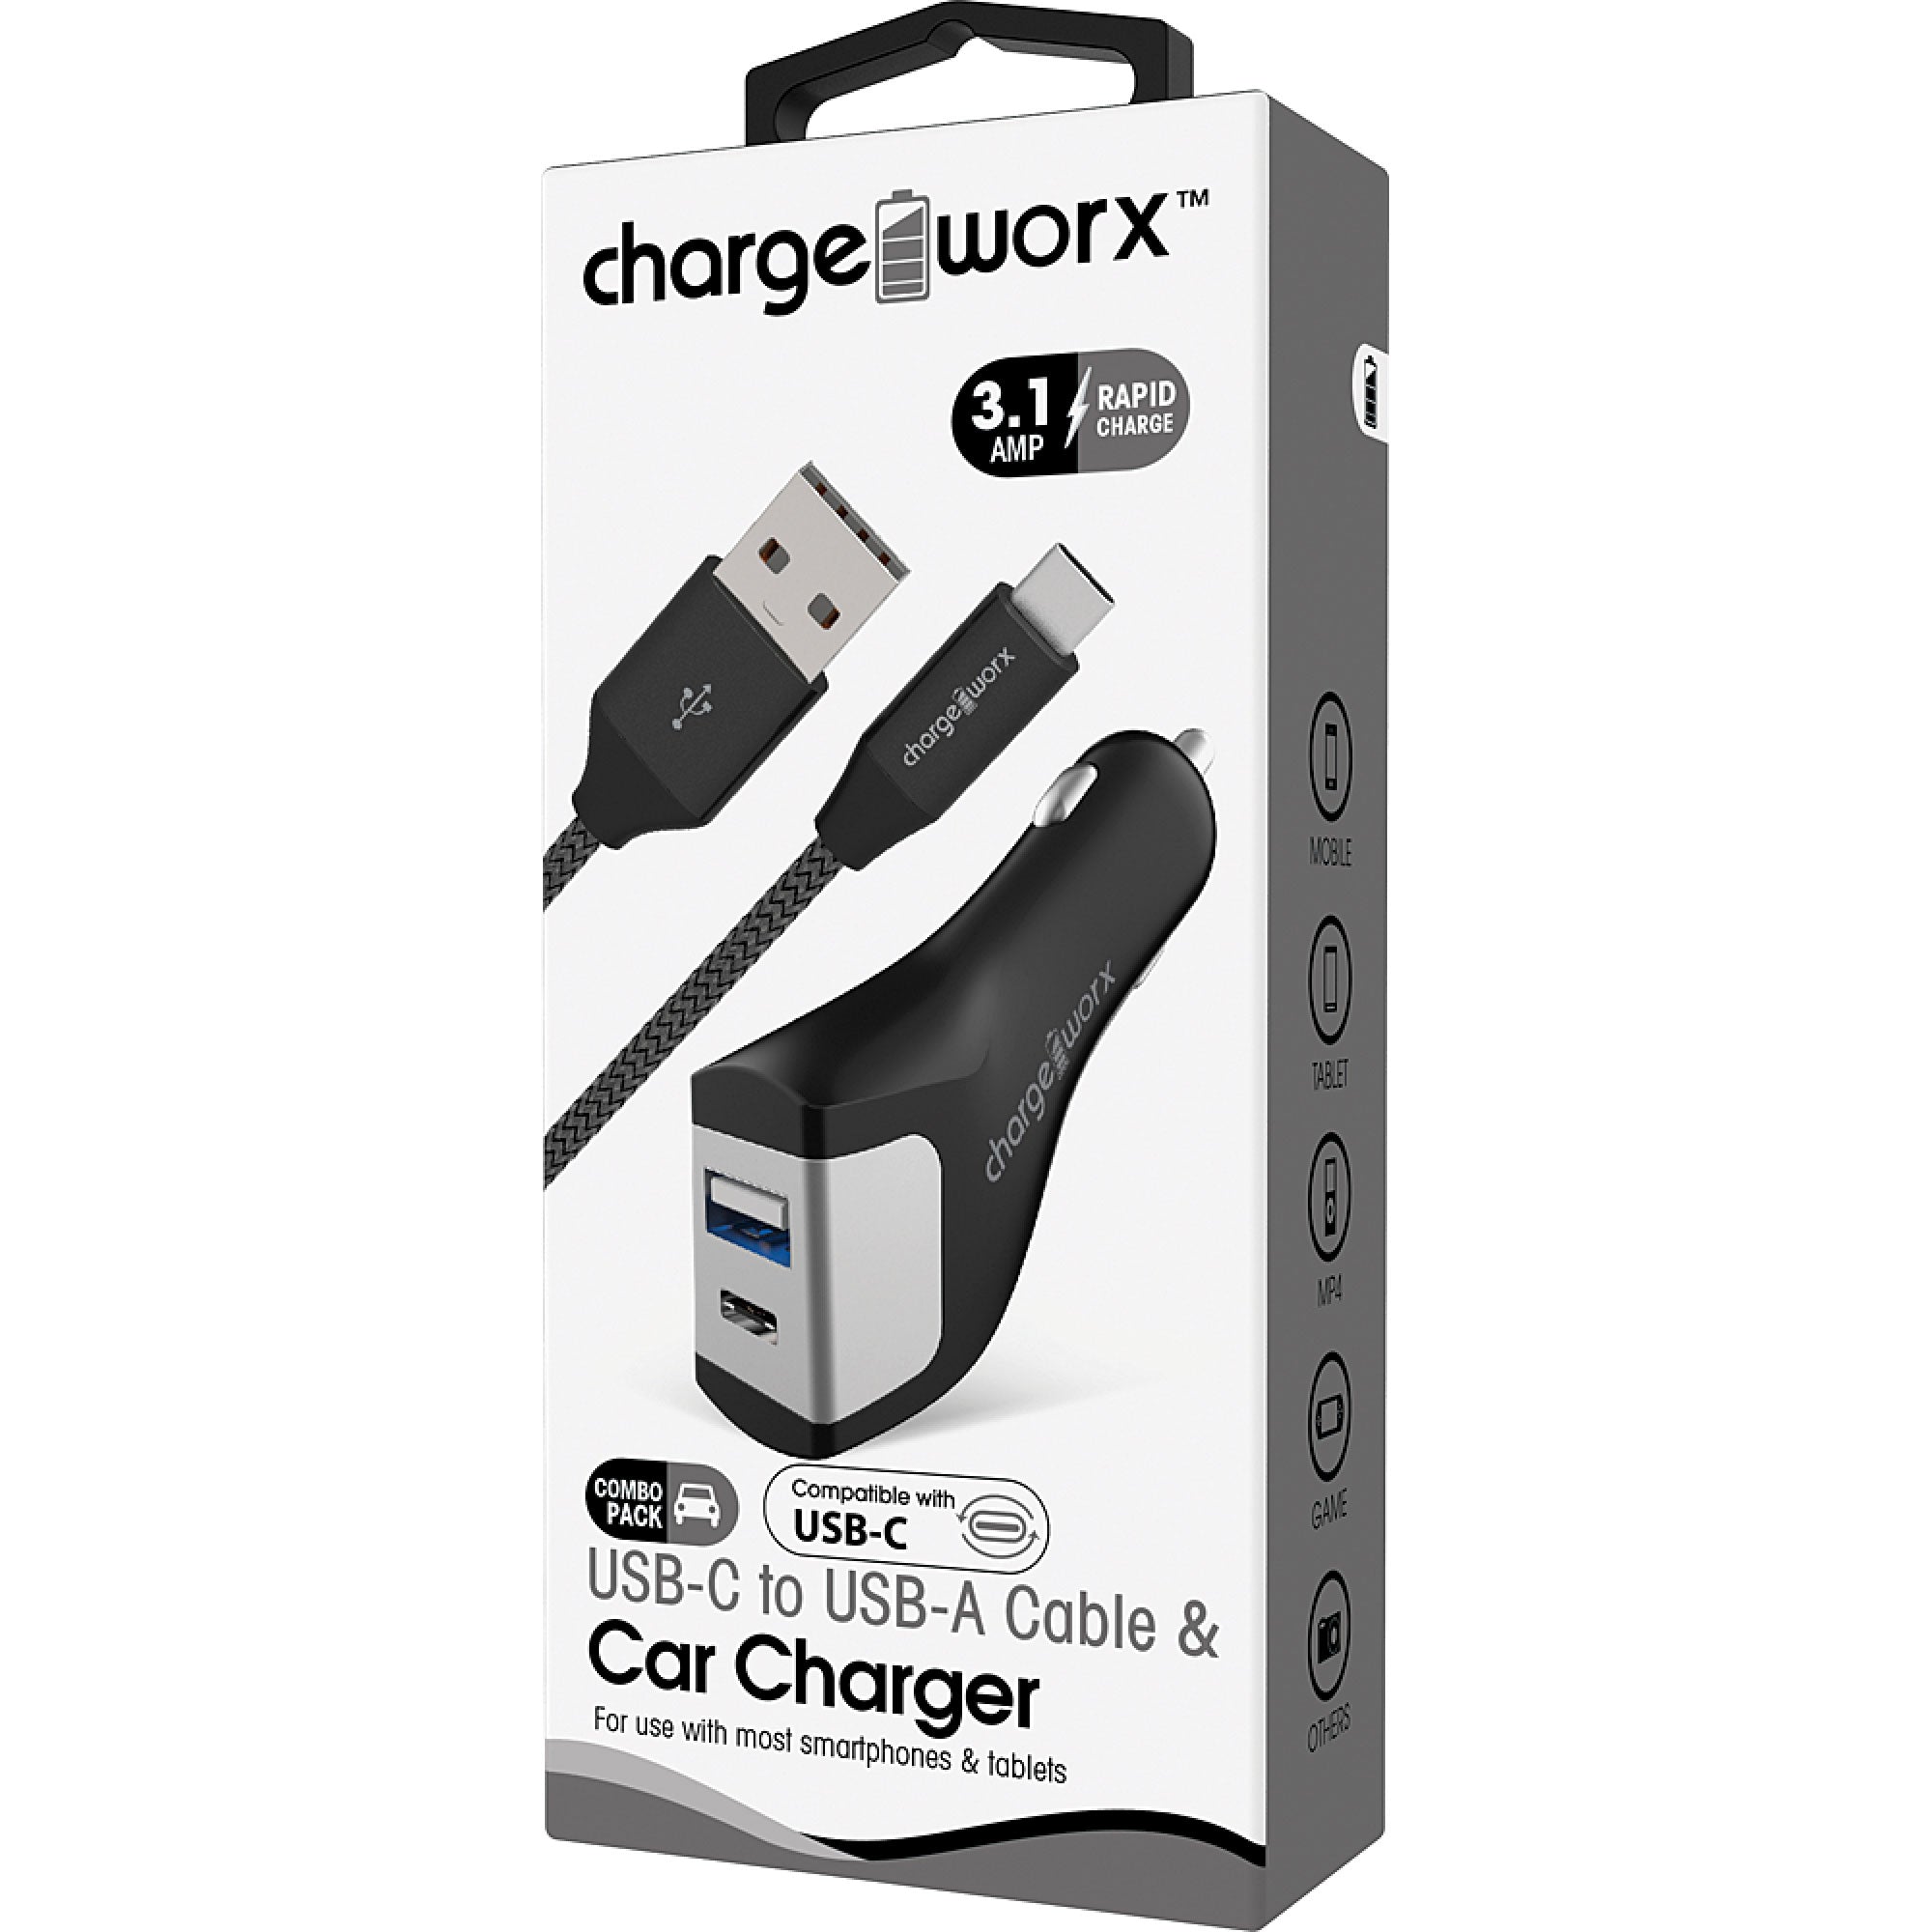 Chargeworx USB-A + USB-C Car Charger & USB-C Cable